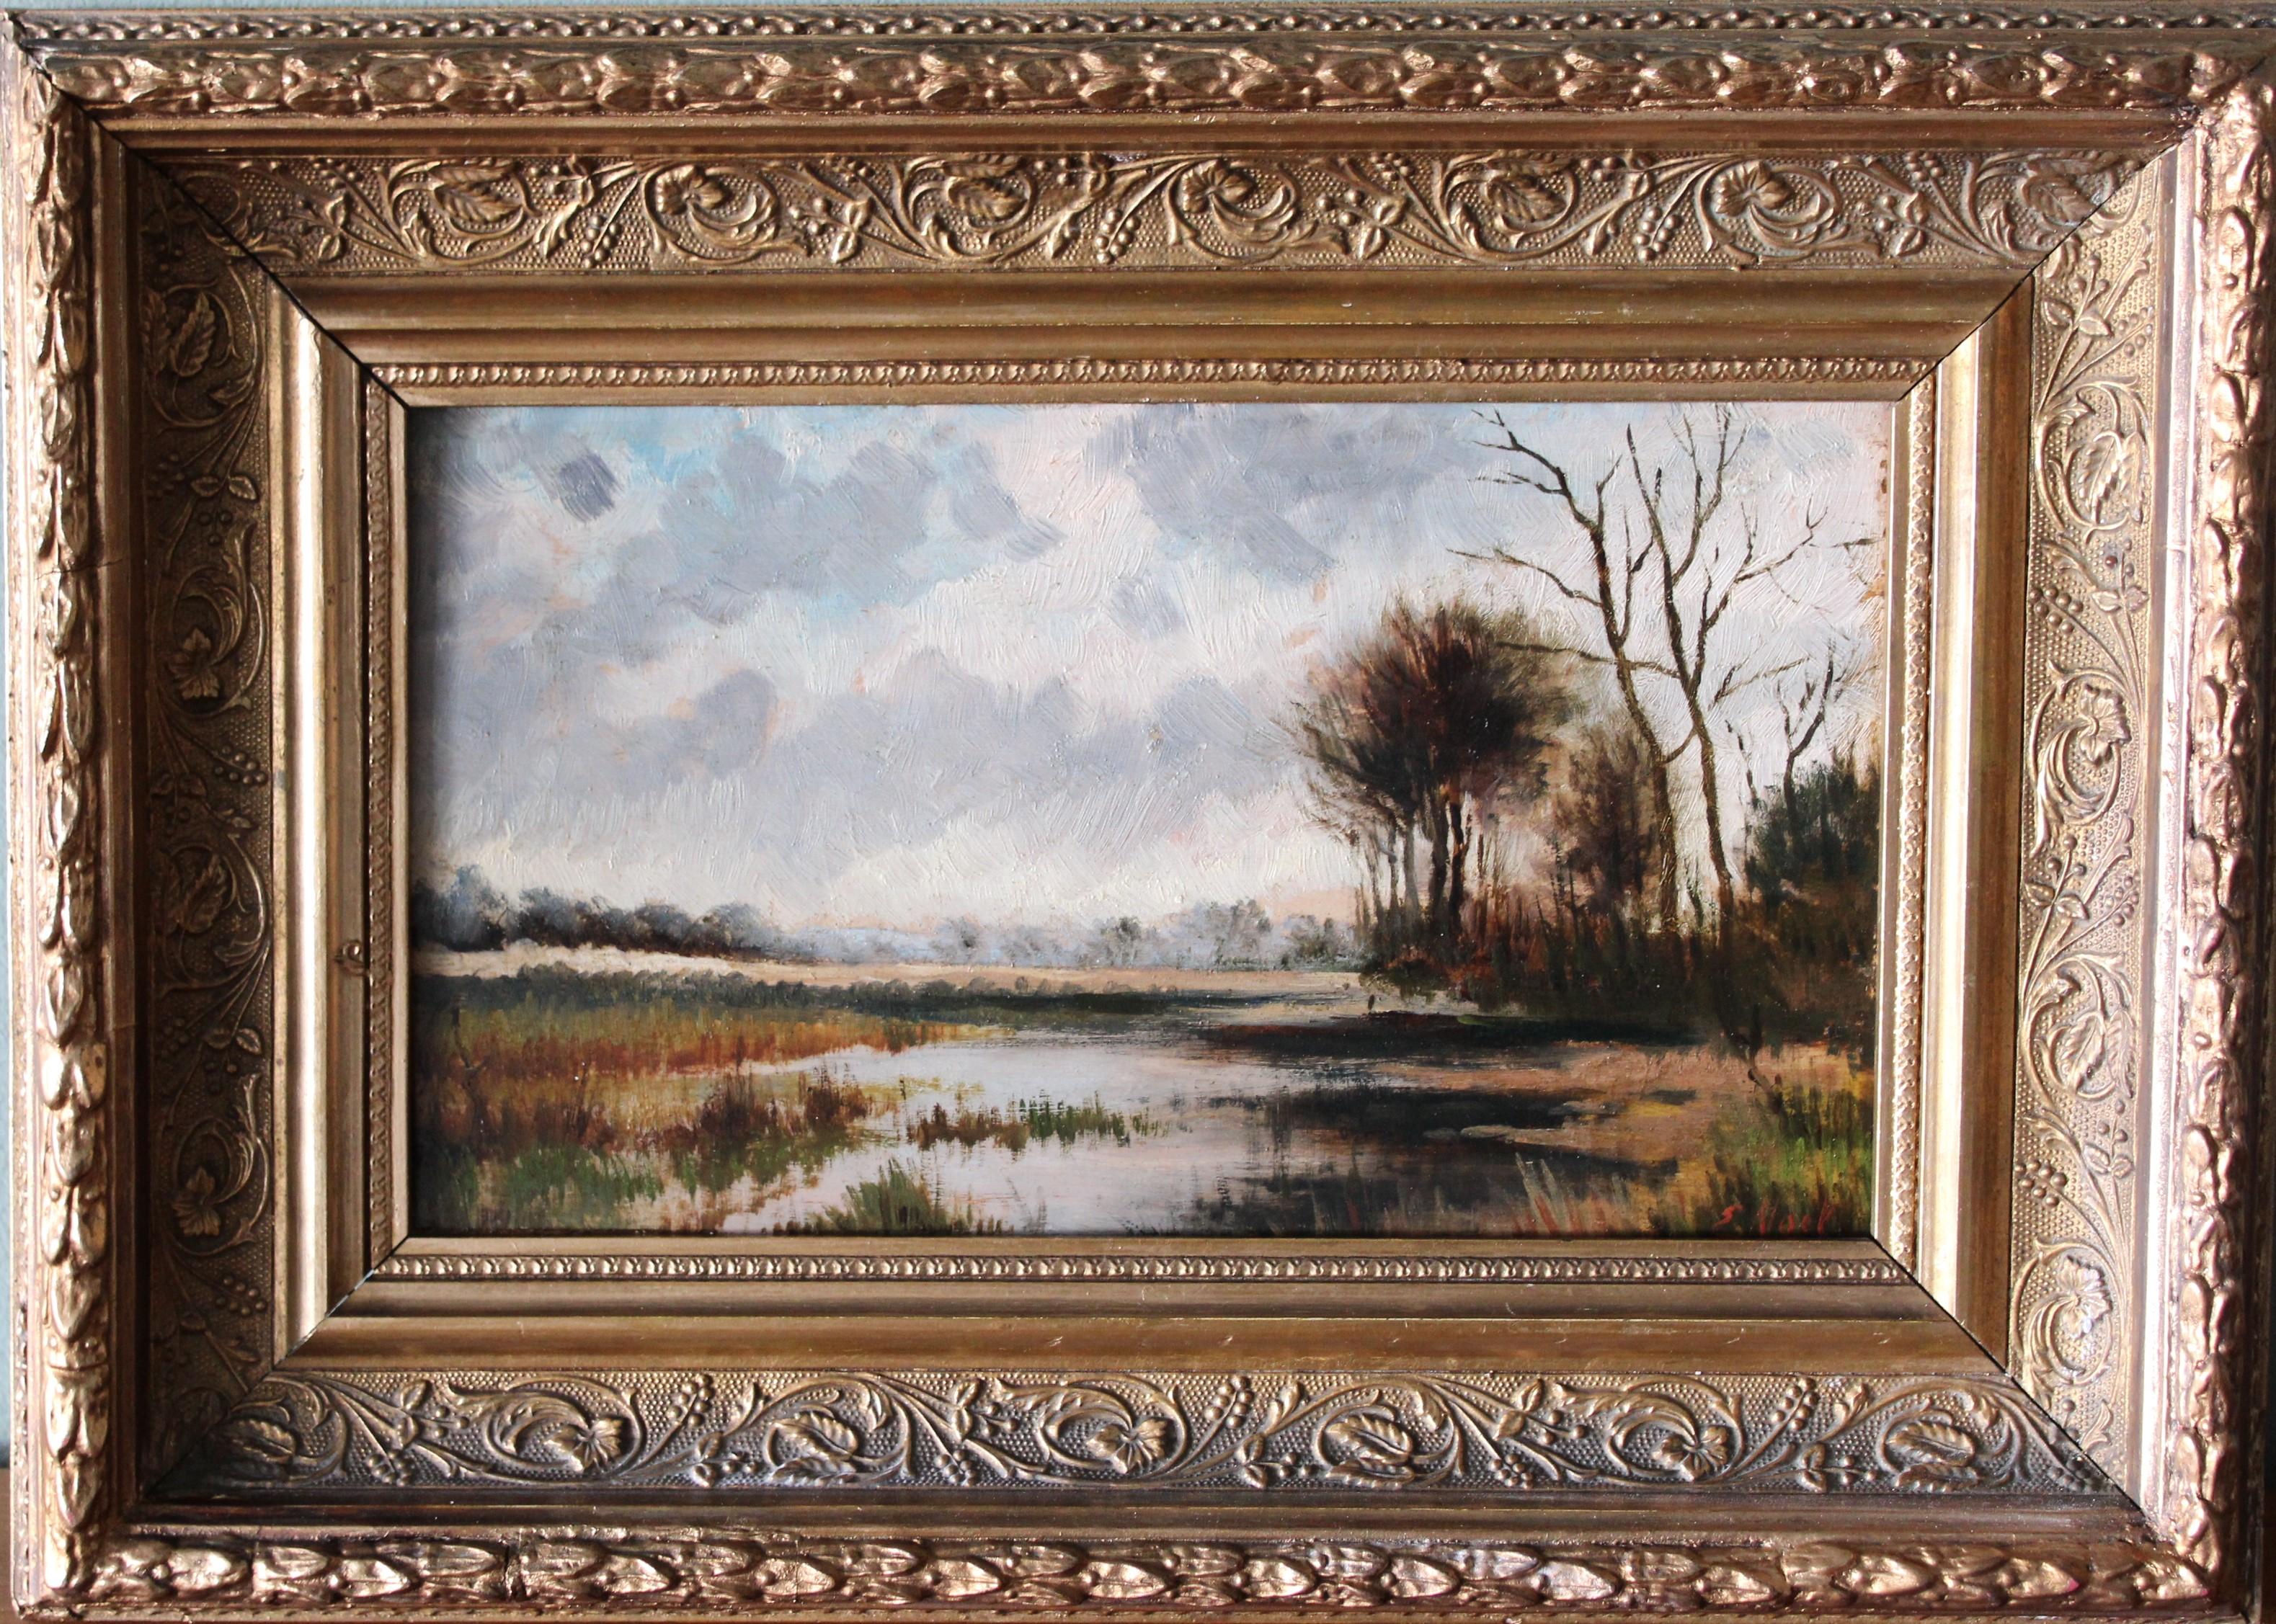 Antique Dutch impressionist riverscape/landscape oil painting on wood board in a gilt frame, by Dutch artist, Elias Voet (1868-1940) signed in the lower right corner.  This is a charming late 19th Century oil painting on wood in it's original frame.